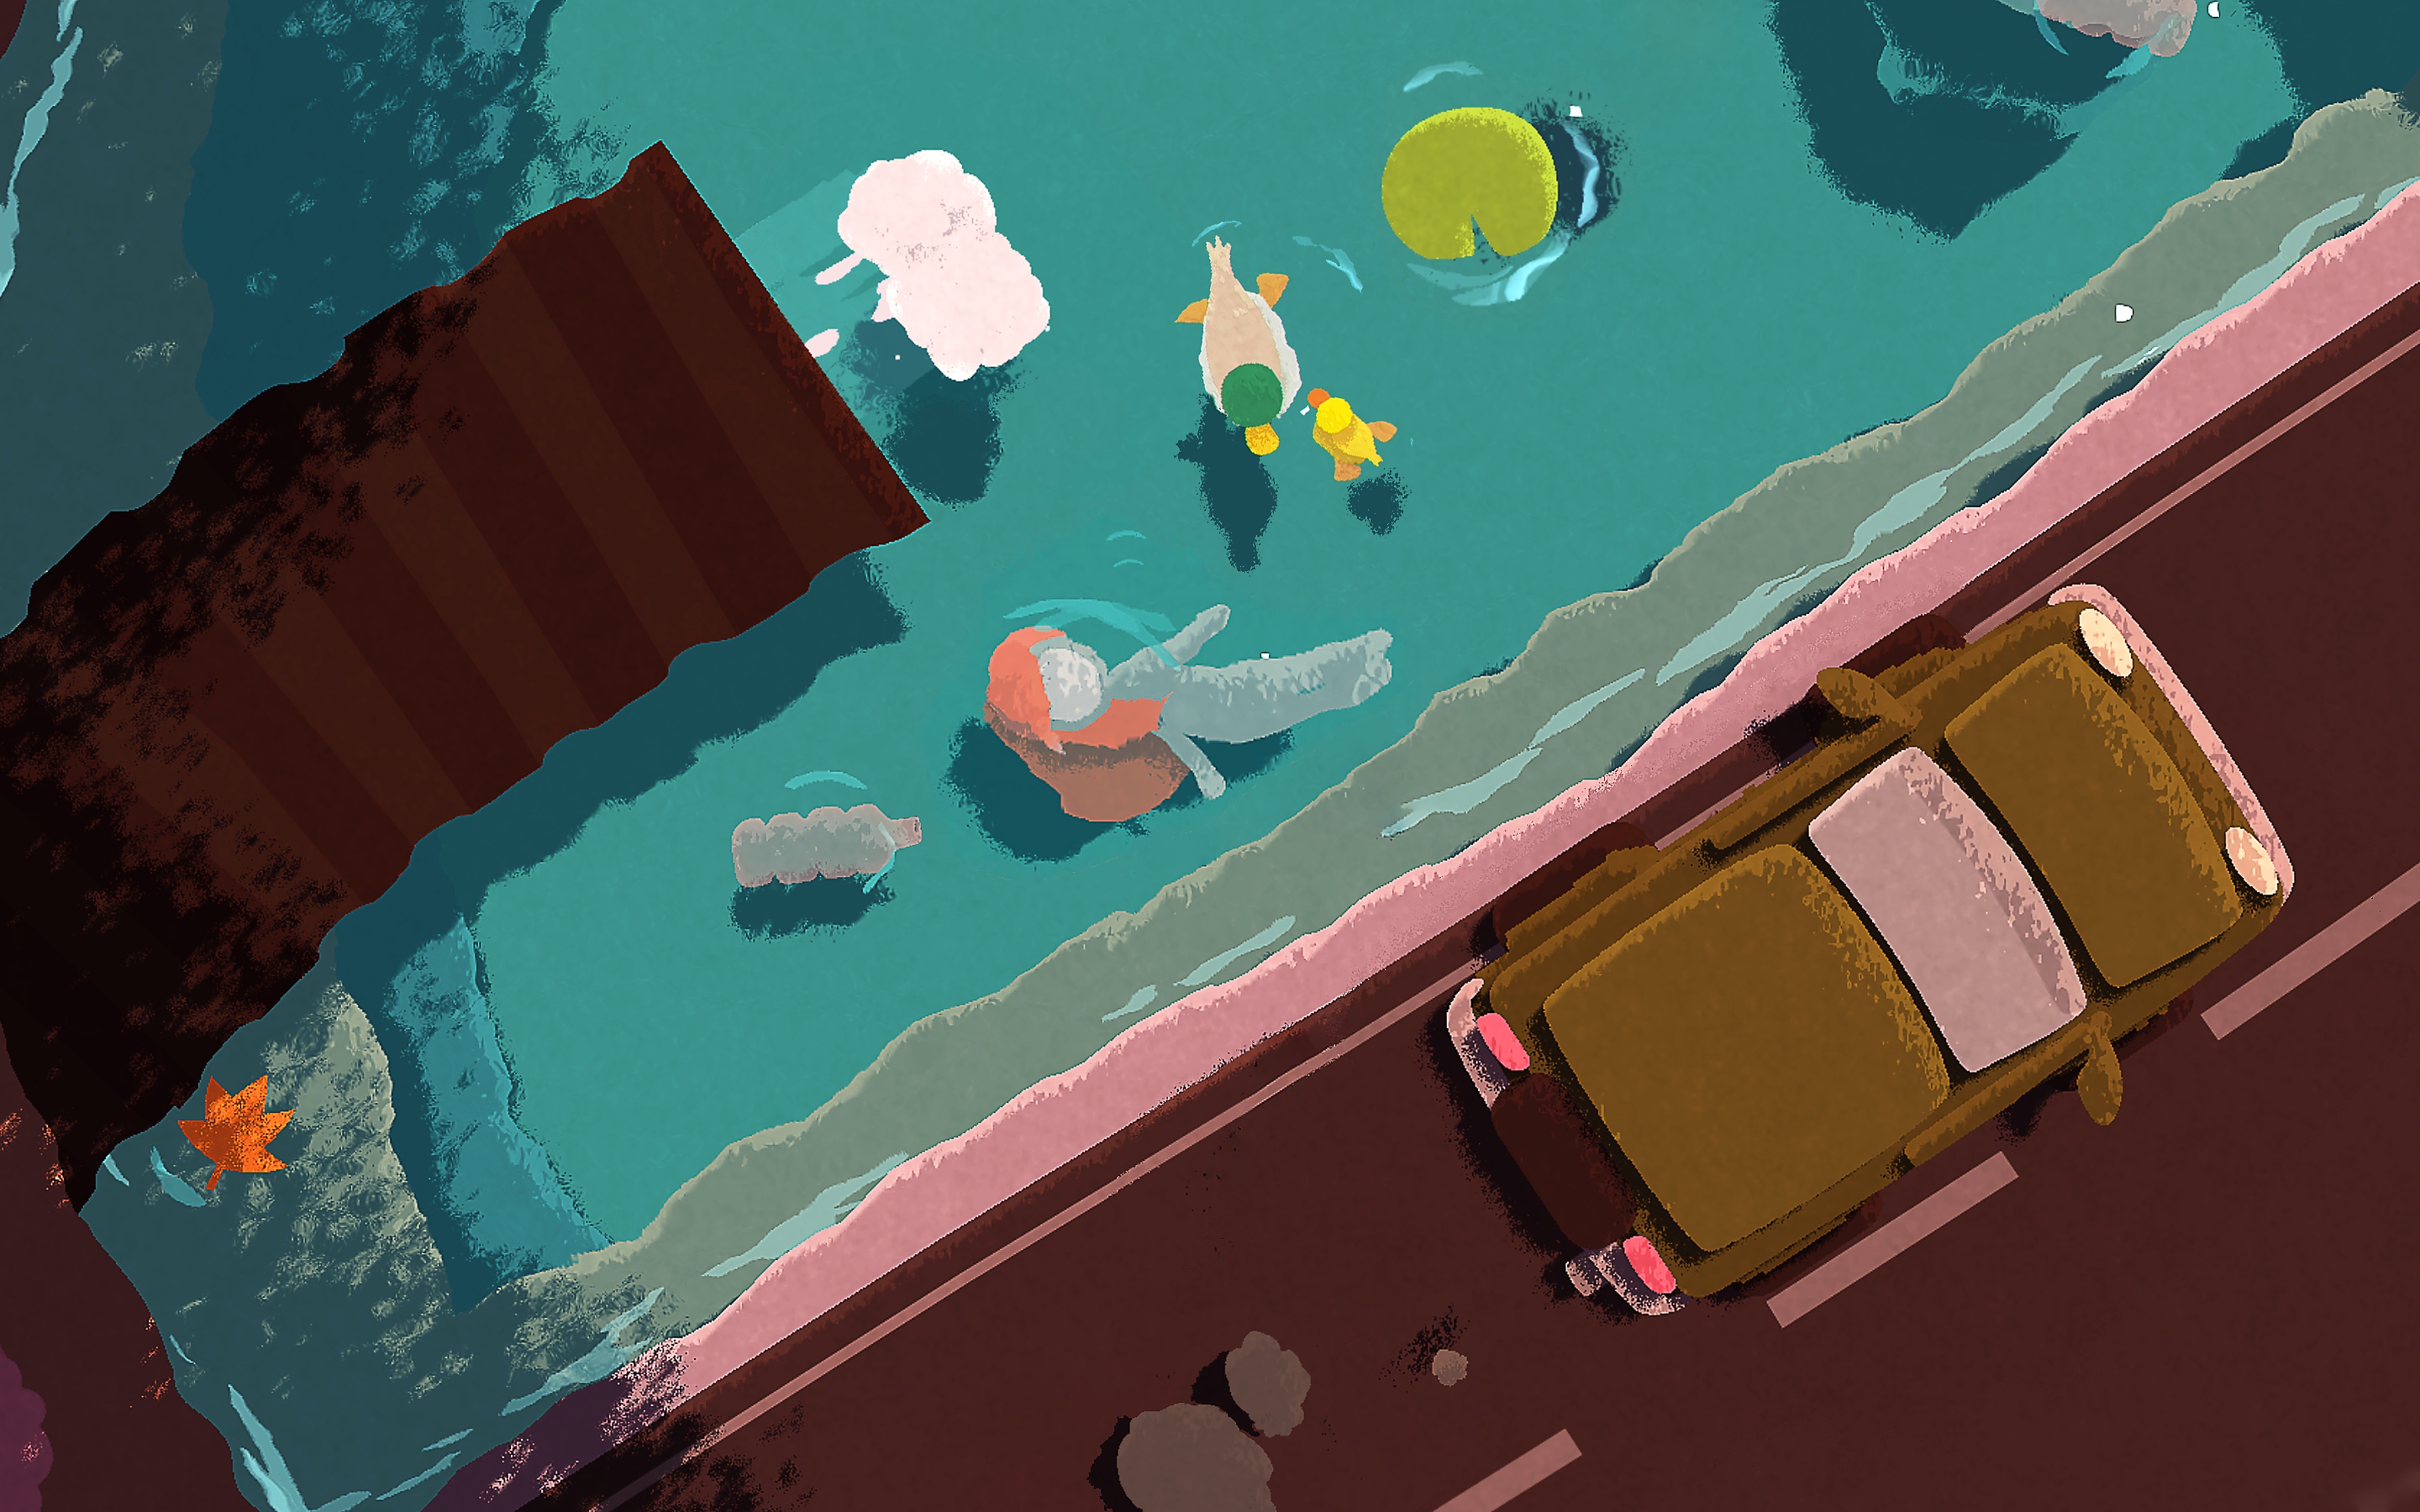 Naiad screenshot showing a character floating down a river under a bridge with cars driving across